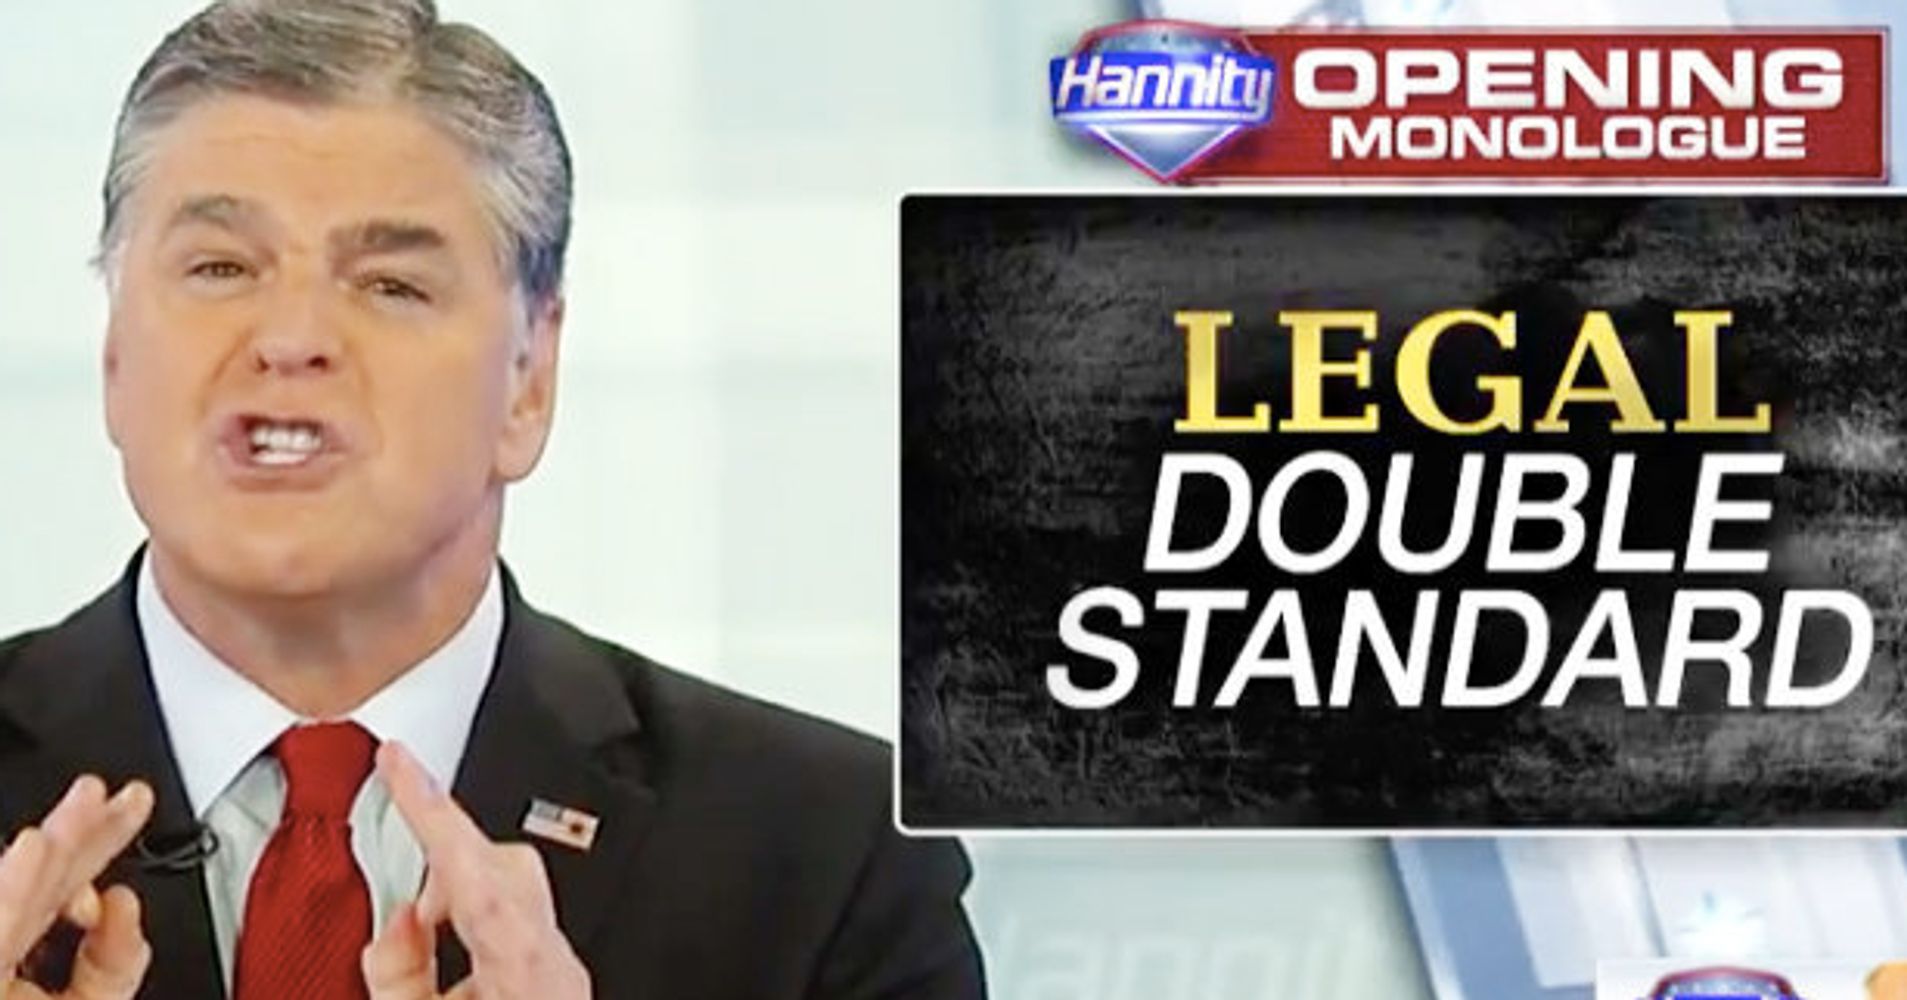 Sean Hannity Melts Down About Hillary Clinton On Day Manafort, Cohen Become Felons ...